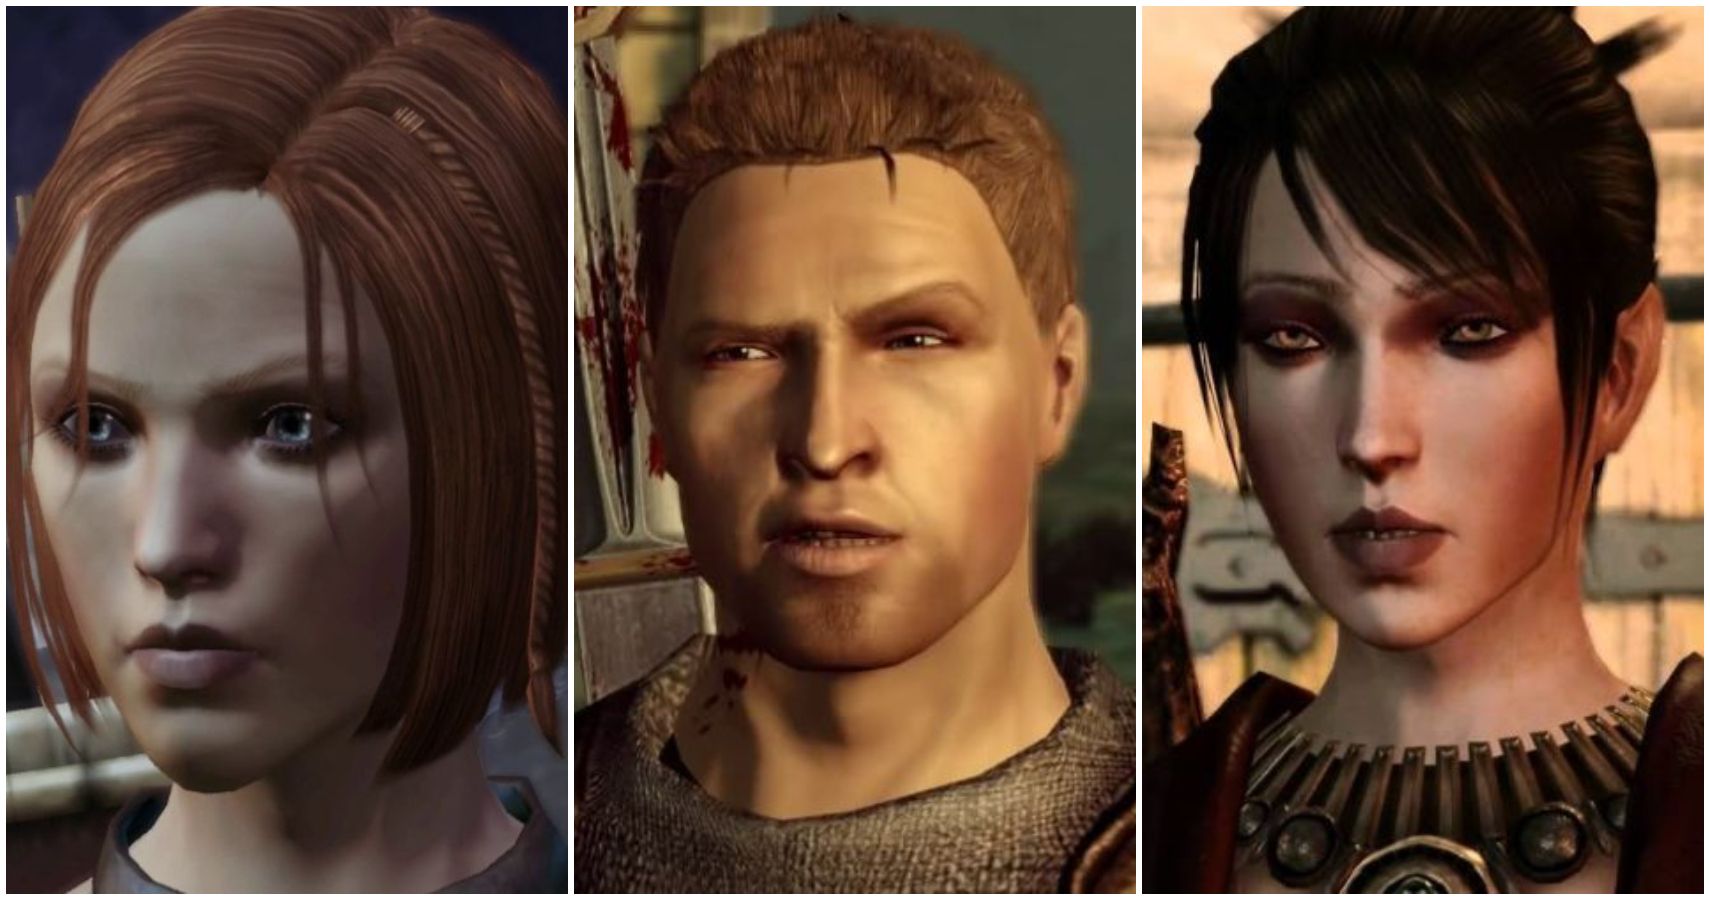 Dragon Age Origins: Every Companion, Worst To Best